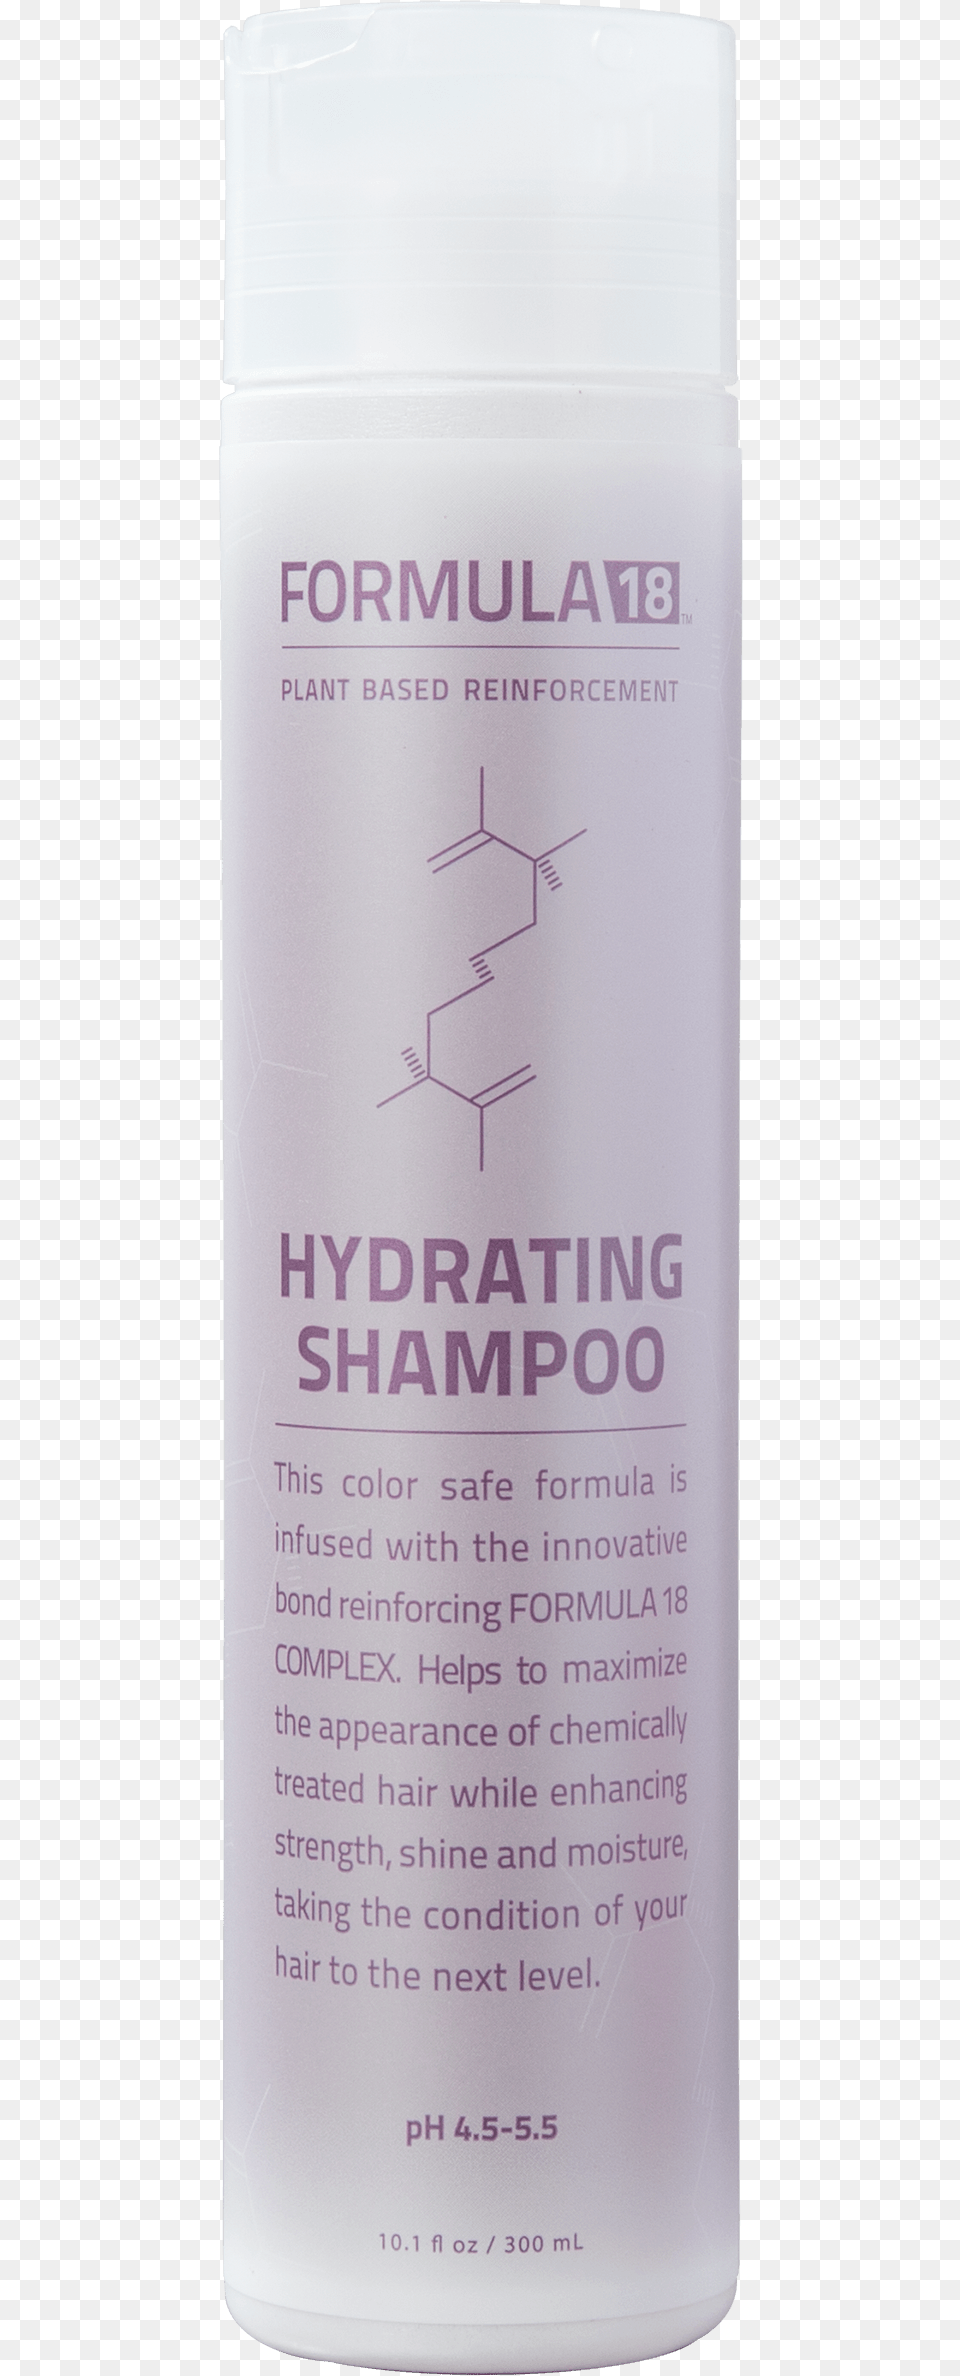 Hydrating Shampoo Cosmetics, Deodorant, Bottle Free Png Download